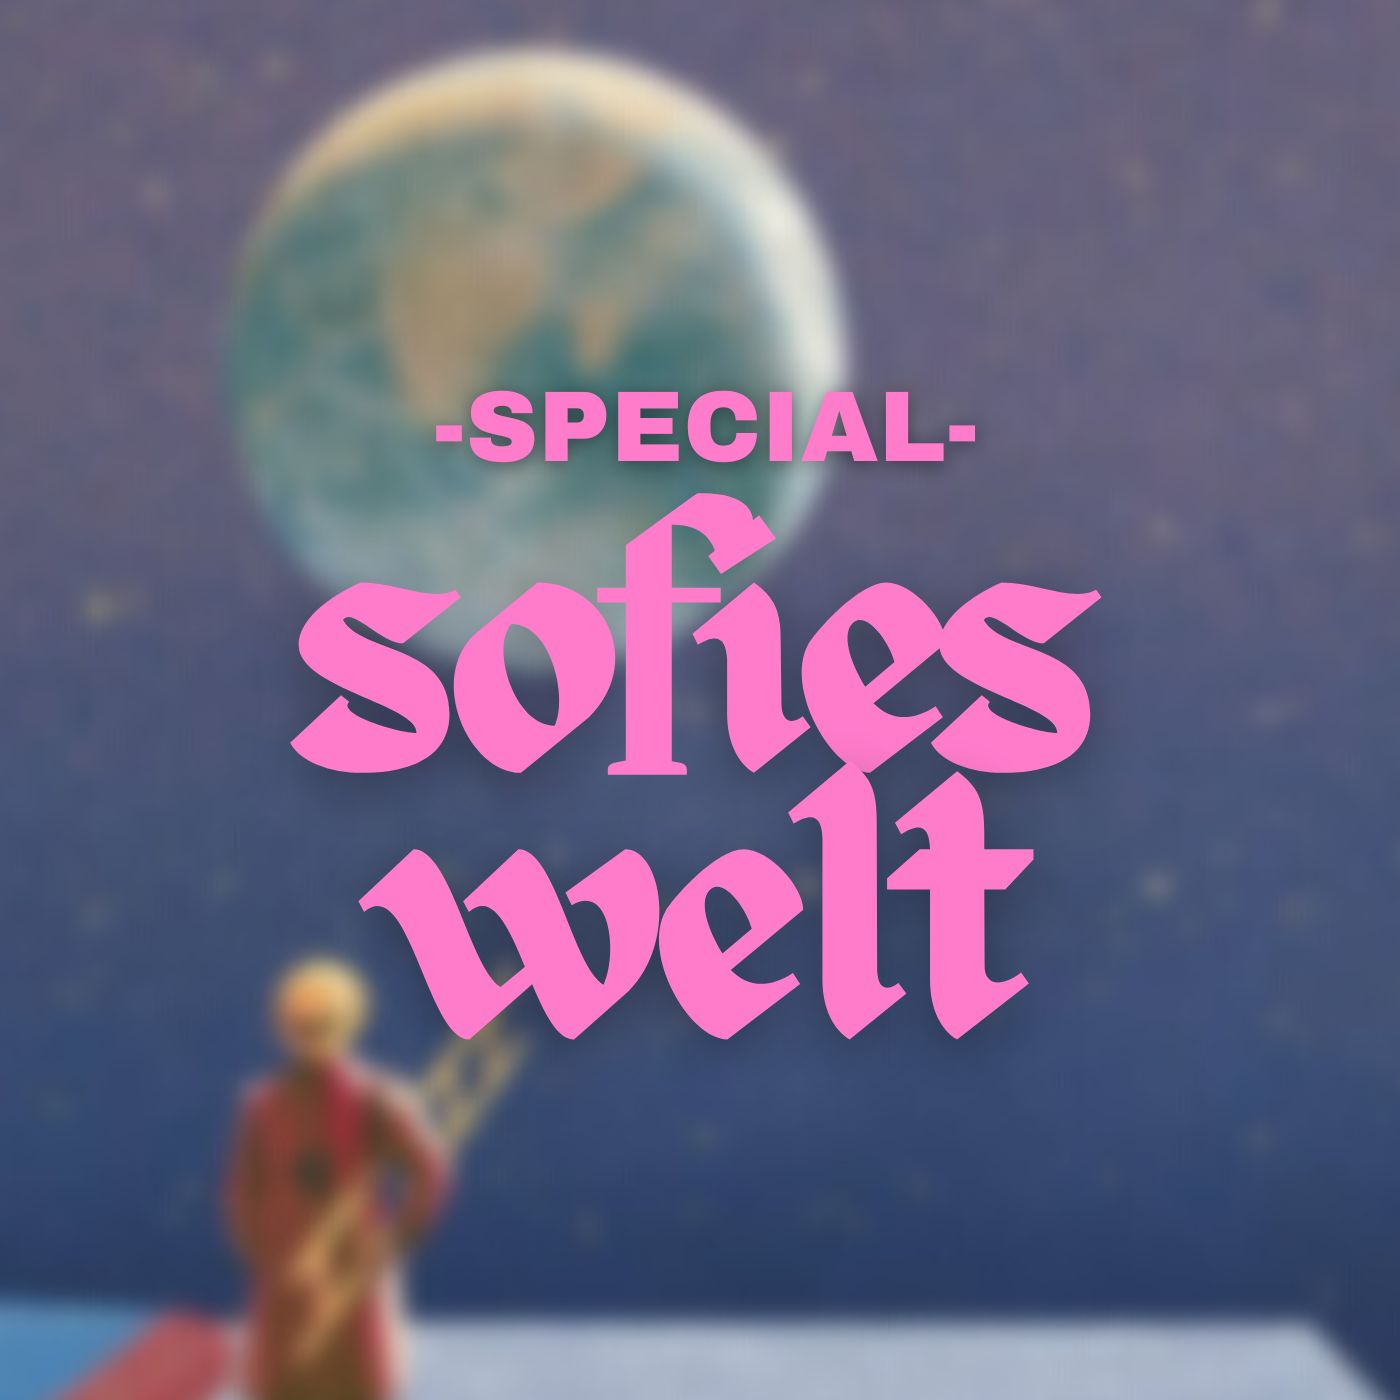 Special: Sofies Welt (Teaser)